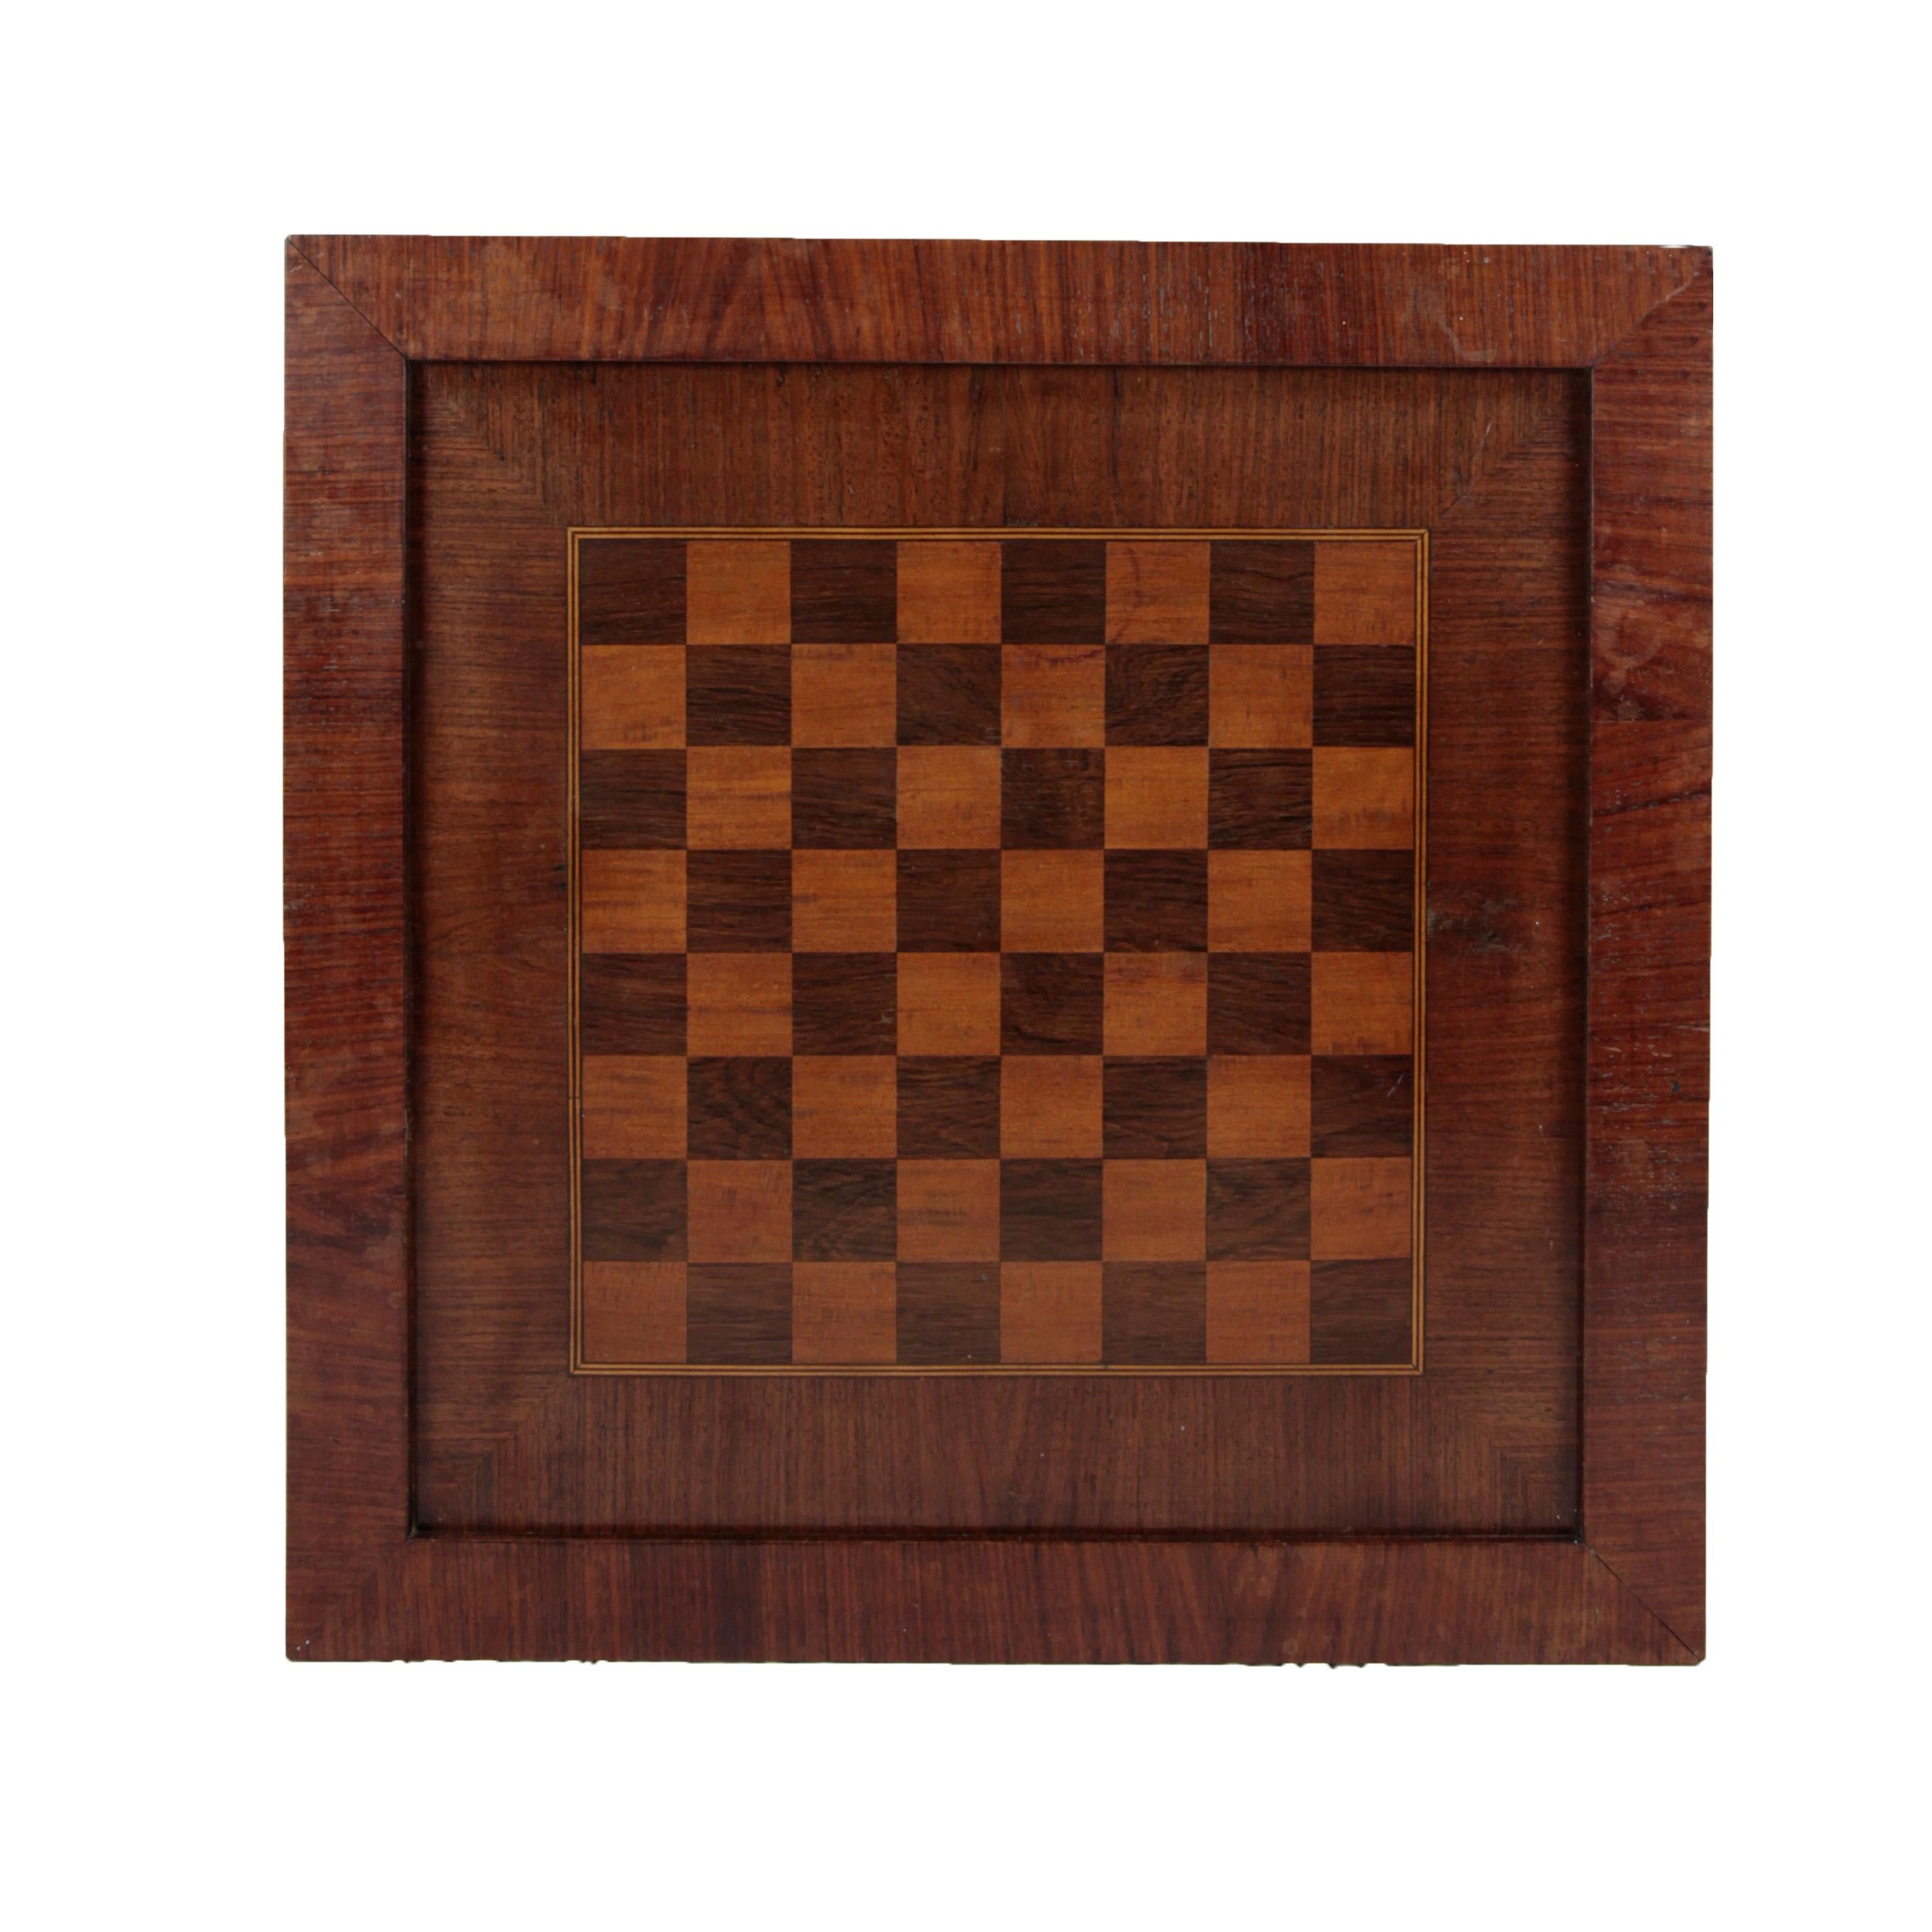 Board with chess marquetry in mahogany and rosewood, France, 1920-1930, restored condition, French shellac hand polish

• 20th century board
• Mahogany and rosewood veneer
• Restored state
• French shellac hand polish
• Measures: Height 2.5